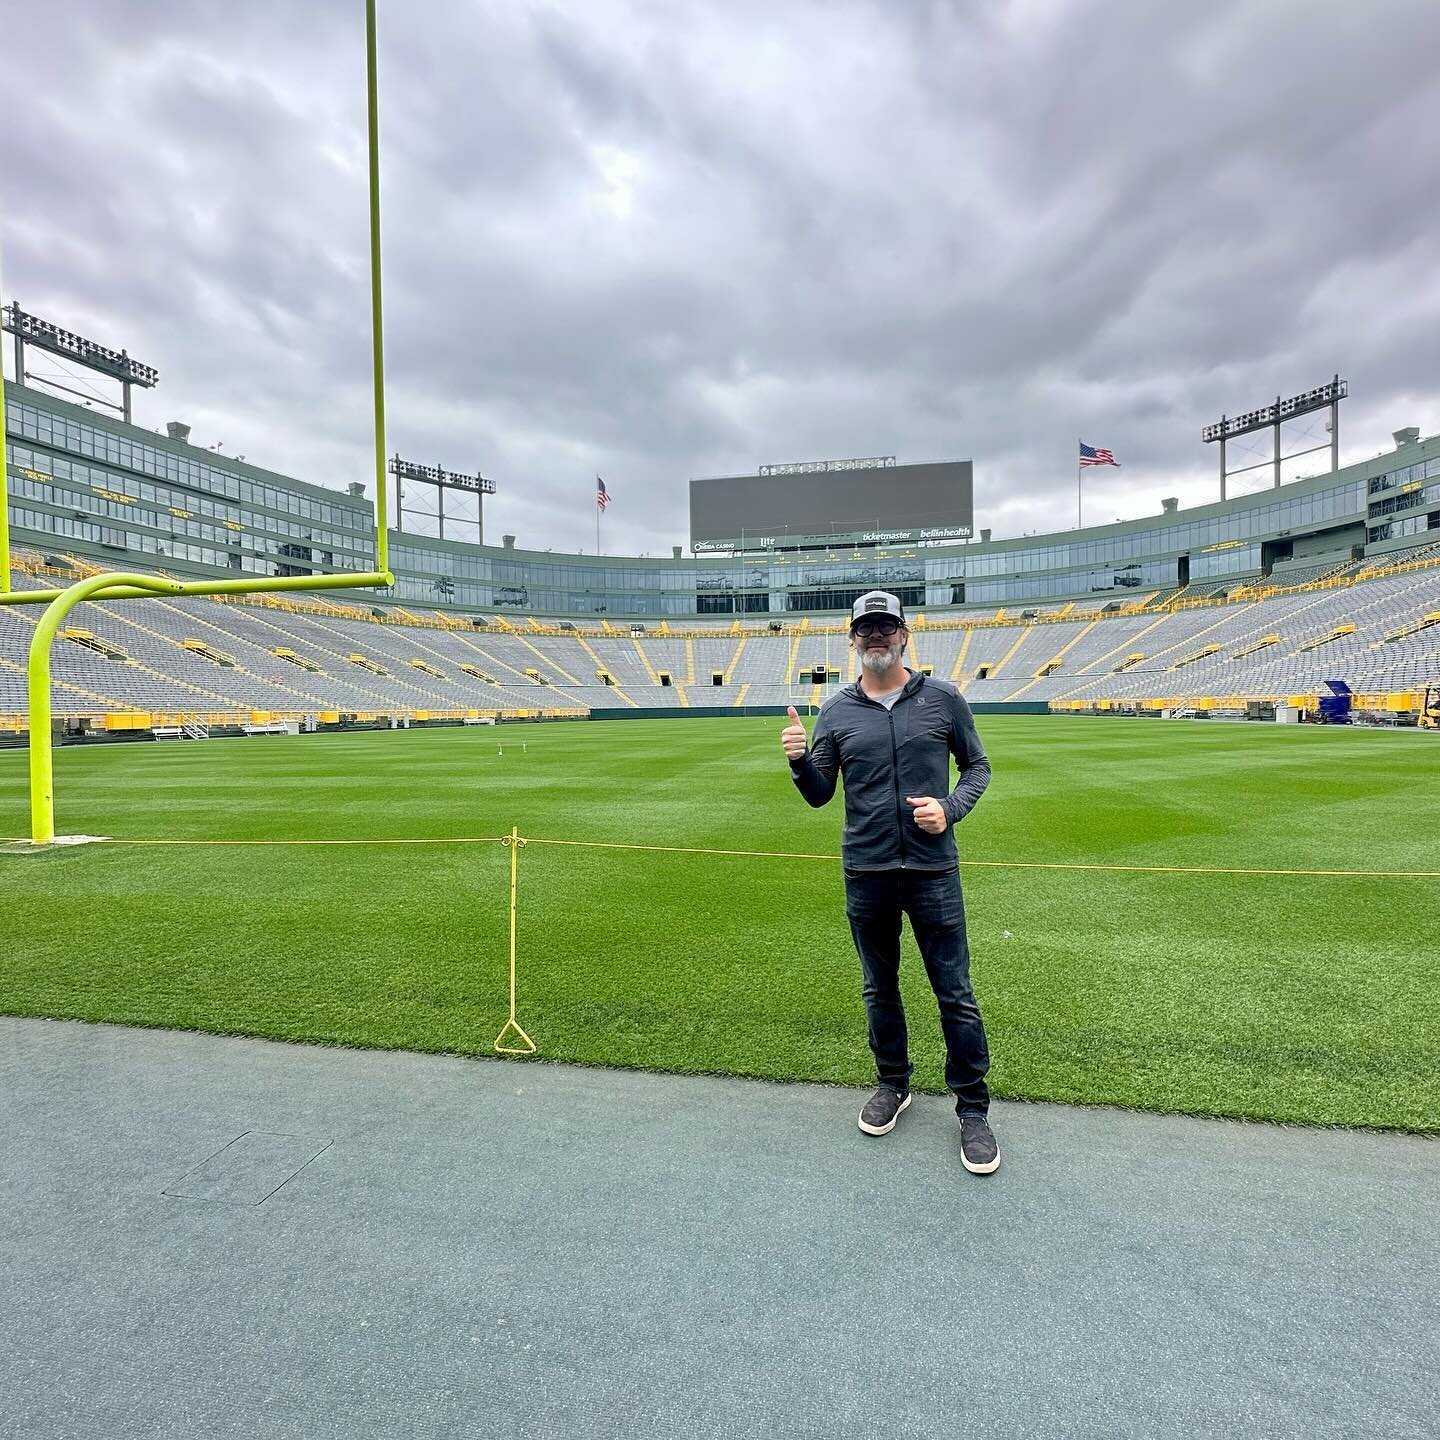 Good luck to @packers today - I was spoiled last fall while in town promoting @triangleparkmovie - special thanks to @the_lombardi_collection - Jack Giambrone #gopackgo #gopackgo🏈 #nfl #nflplayoffs #greenbaypackers #packers #packersnation